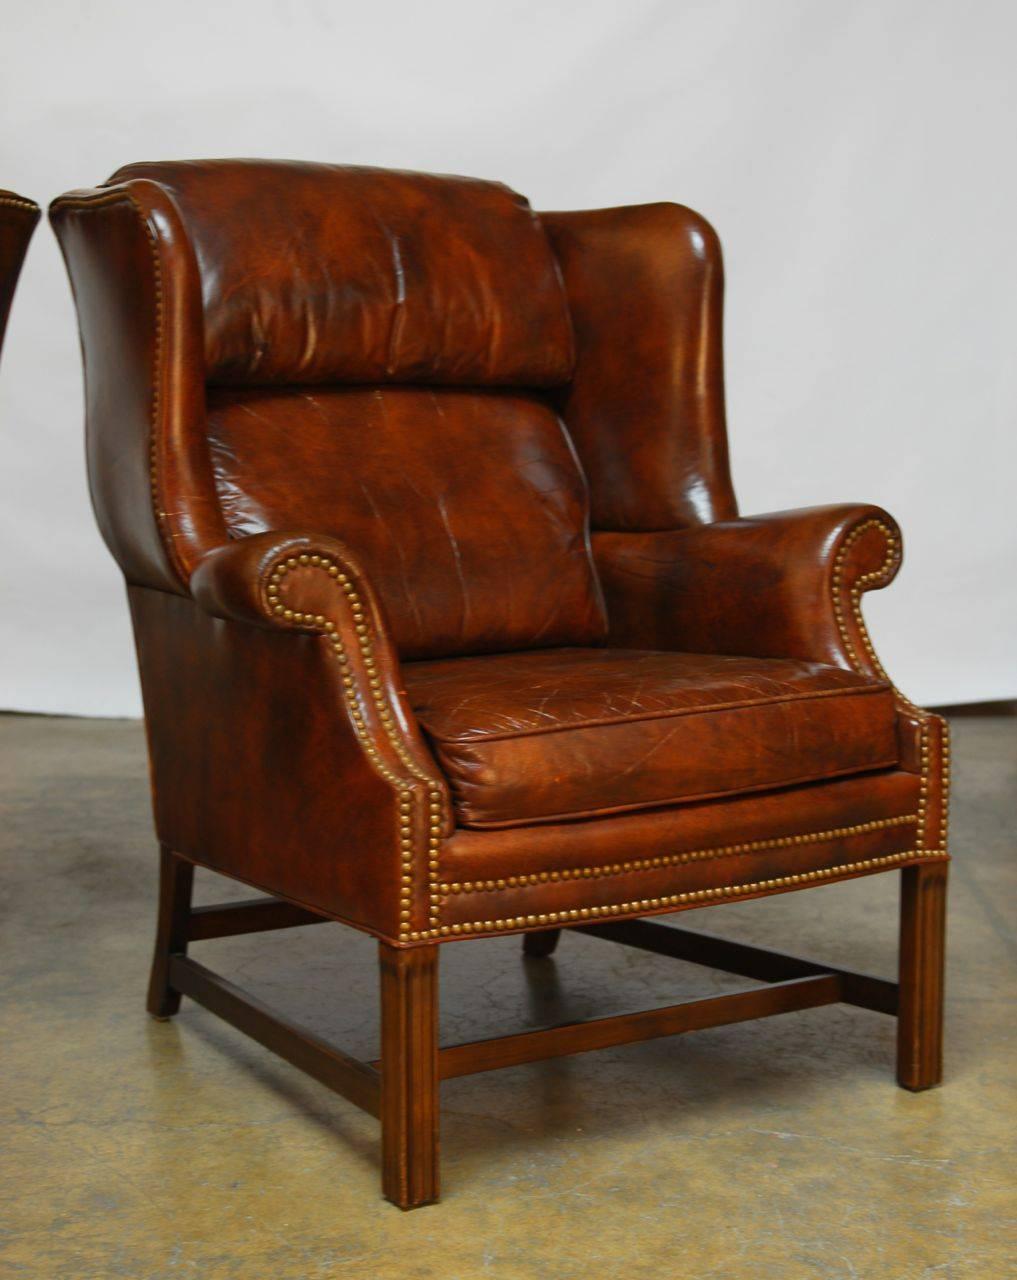 American Pair of Marbled Leather Wingback Chairs by Schafer Bros